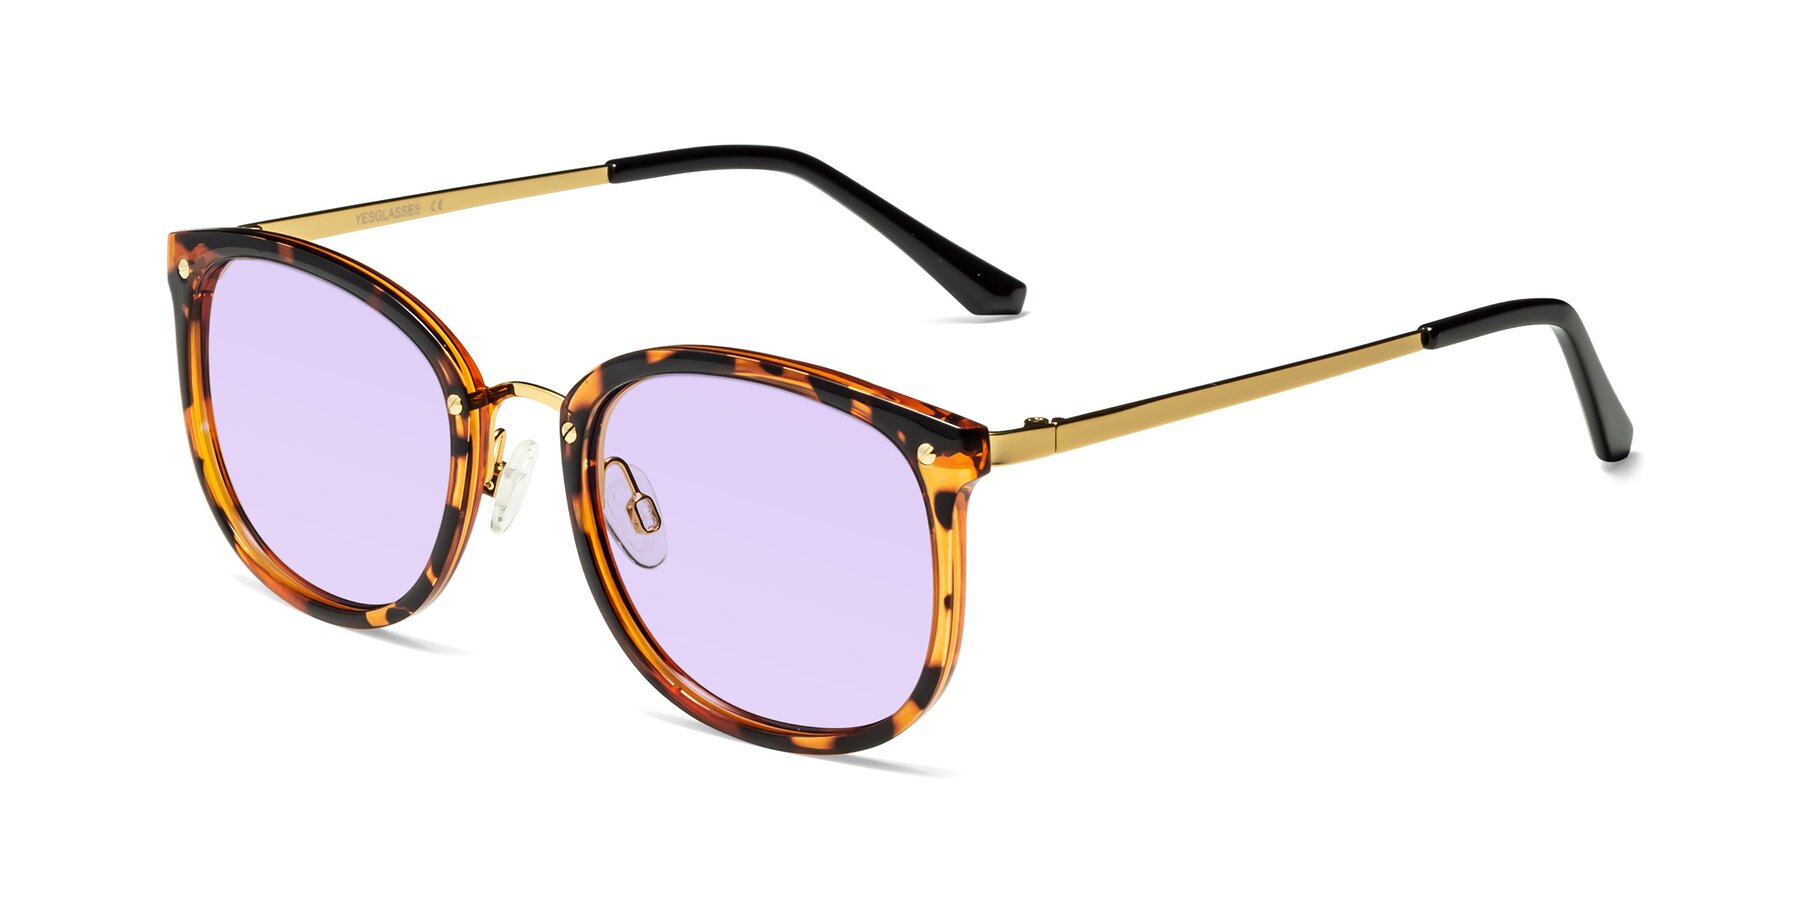 Angle of Timeless in Tortoise-Golden with Light Purple Tinted Lenses